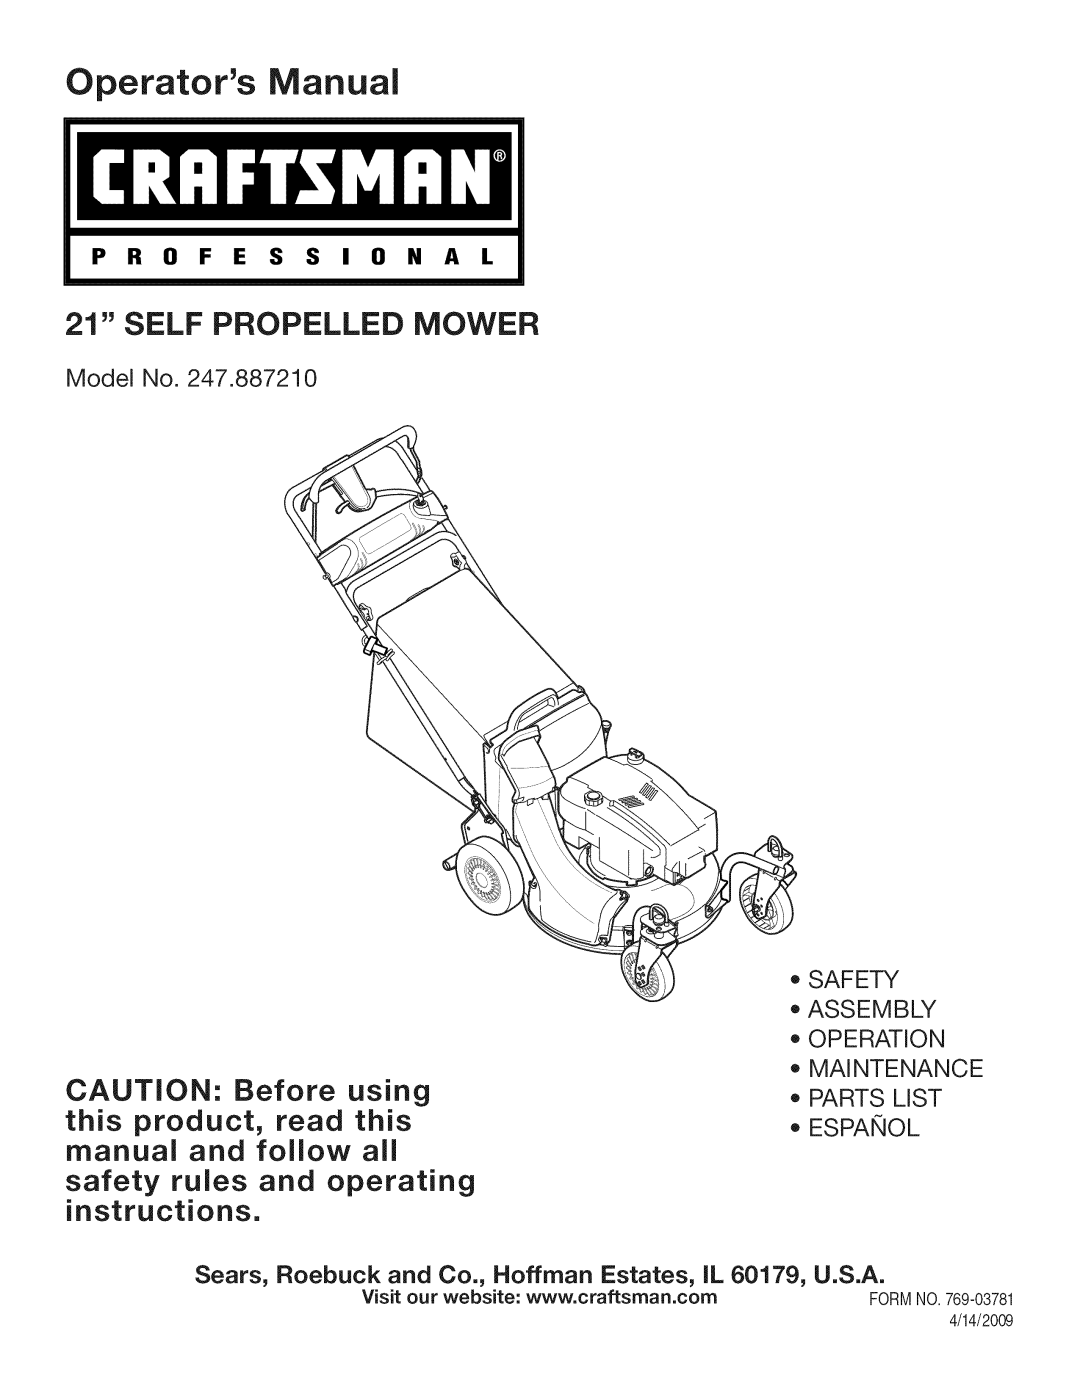 Craftsman 247.887210 manual Self Propelled Mower, safety rules and operating, Operators Manual, instructions 